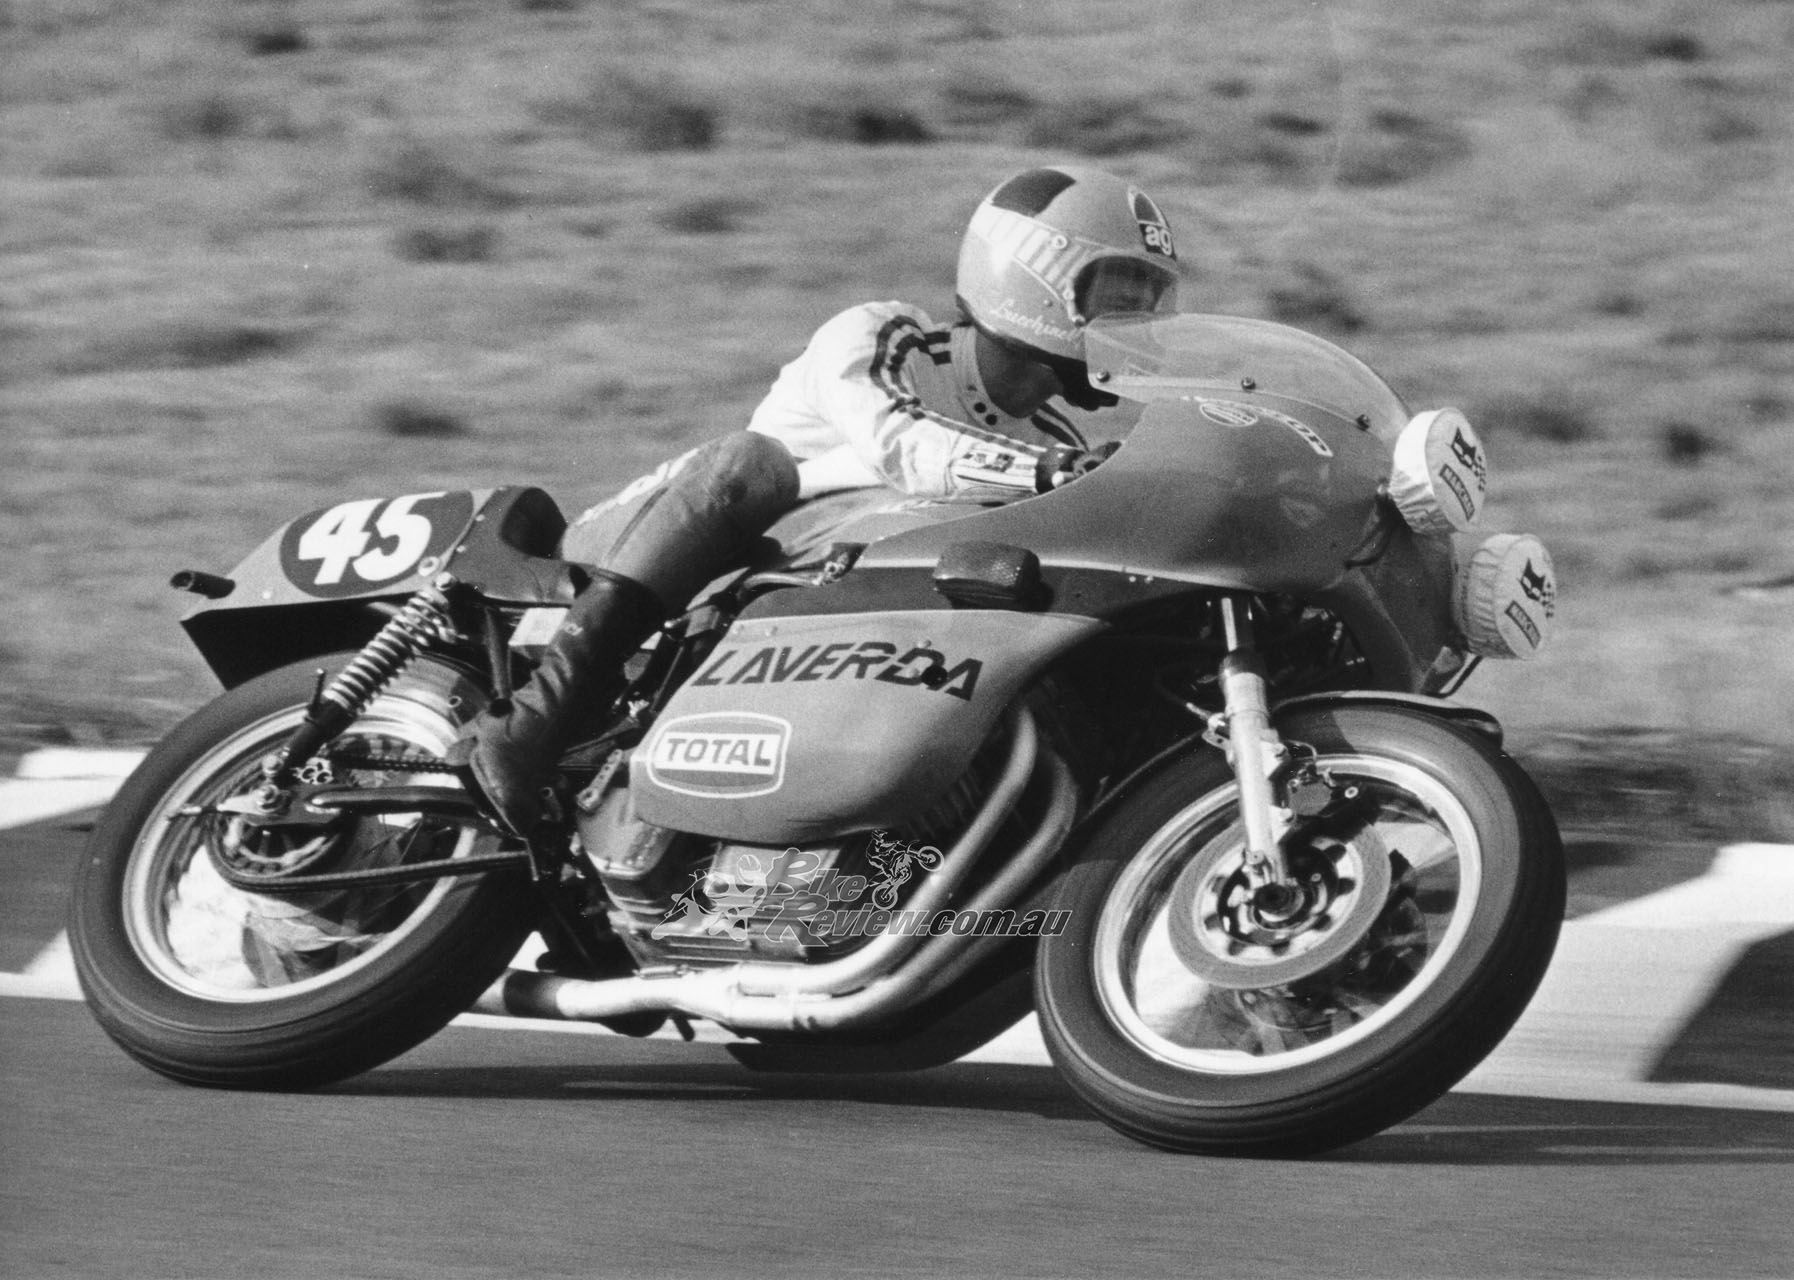 1975 Sept. - Le Mans 24h Bol d'Or. Lucchinelli on experimental 120-degree engine, DNF.r. Lucchinelli on experimental 120-degree engine, DNF.